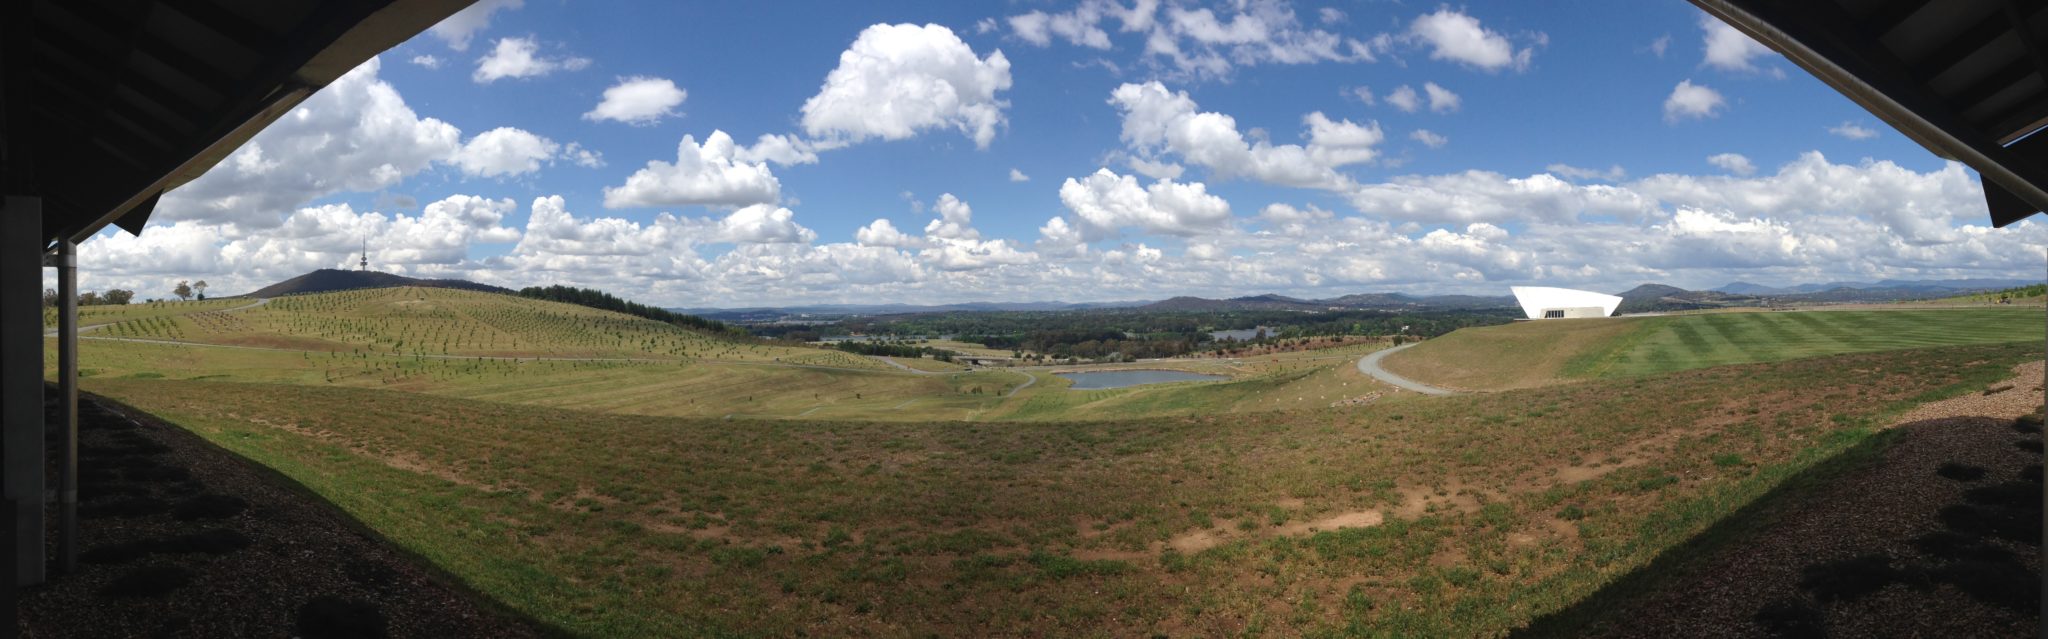 Panorama of Canberra from the National Arboretum